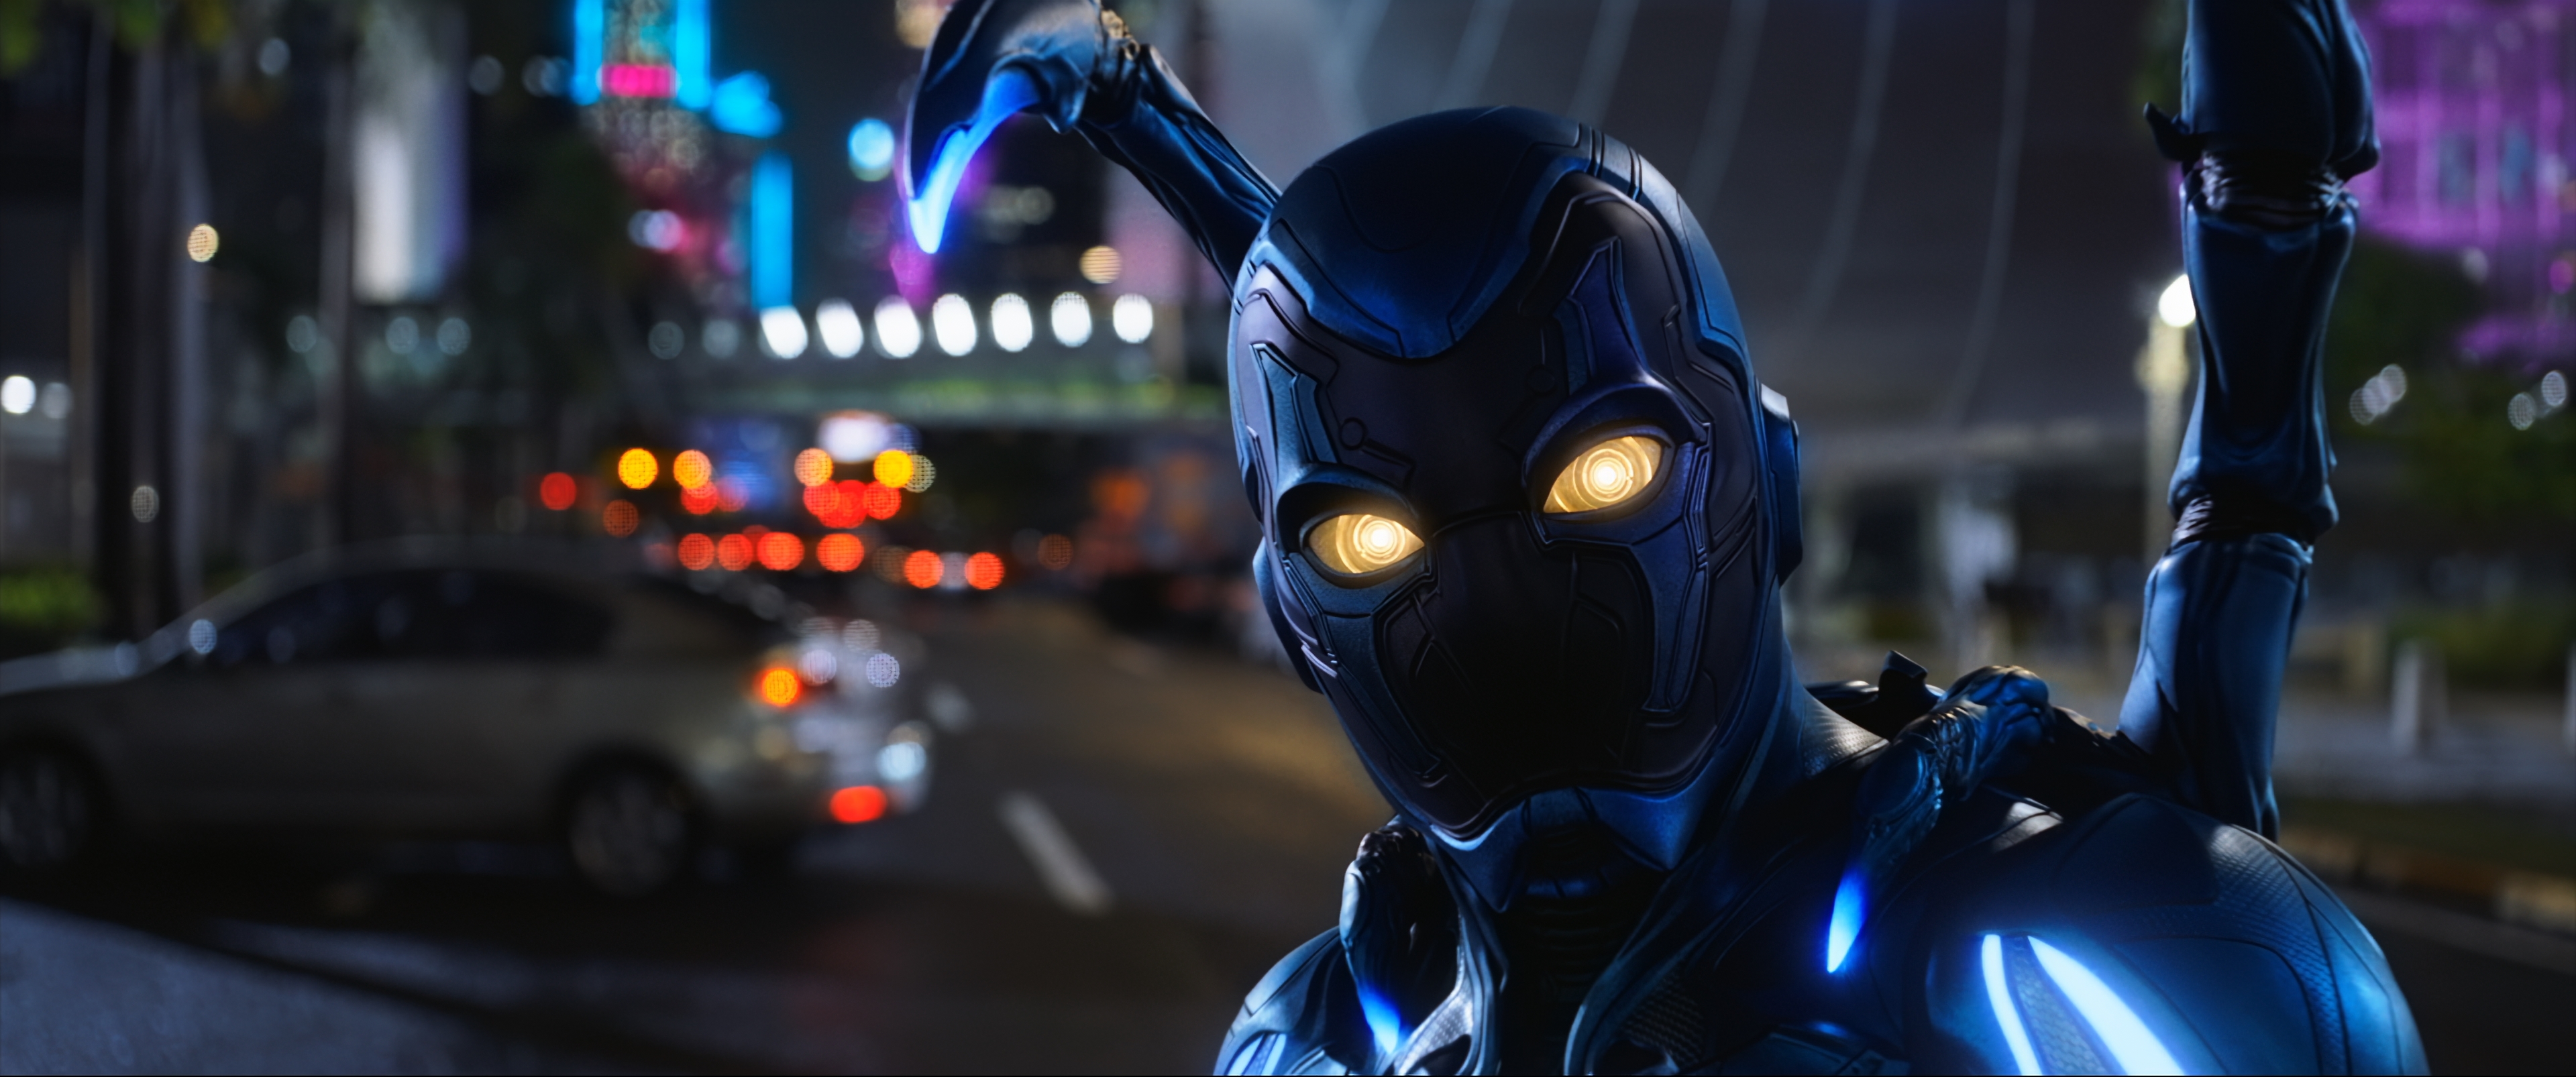 Blue Beetle, DC Extended Universe Wiki